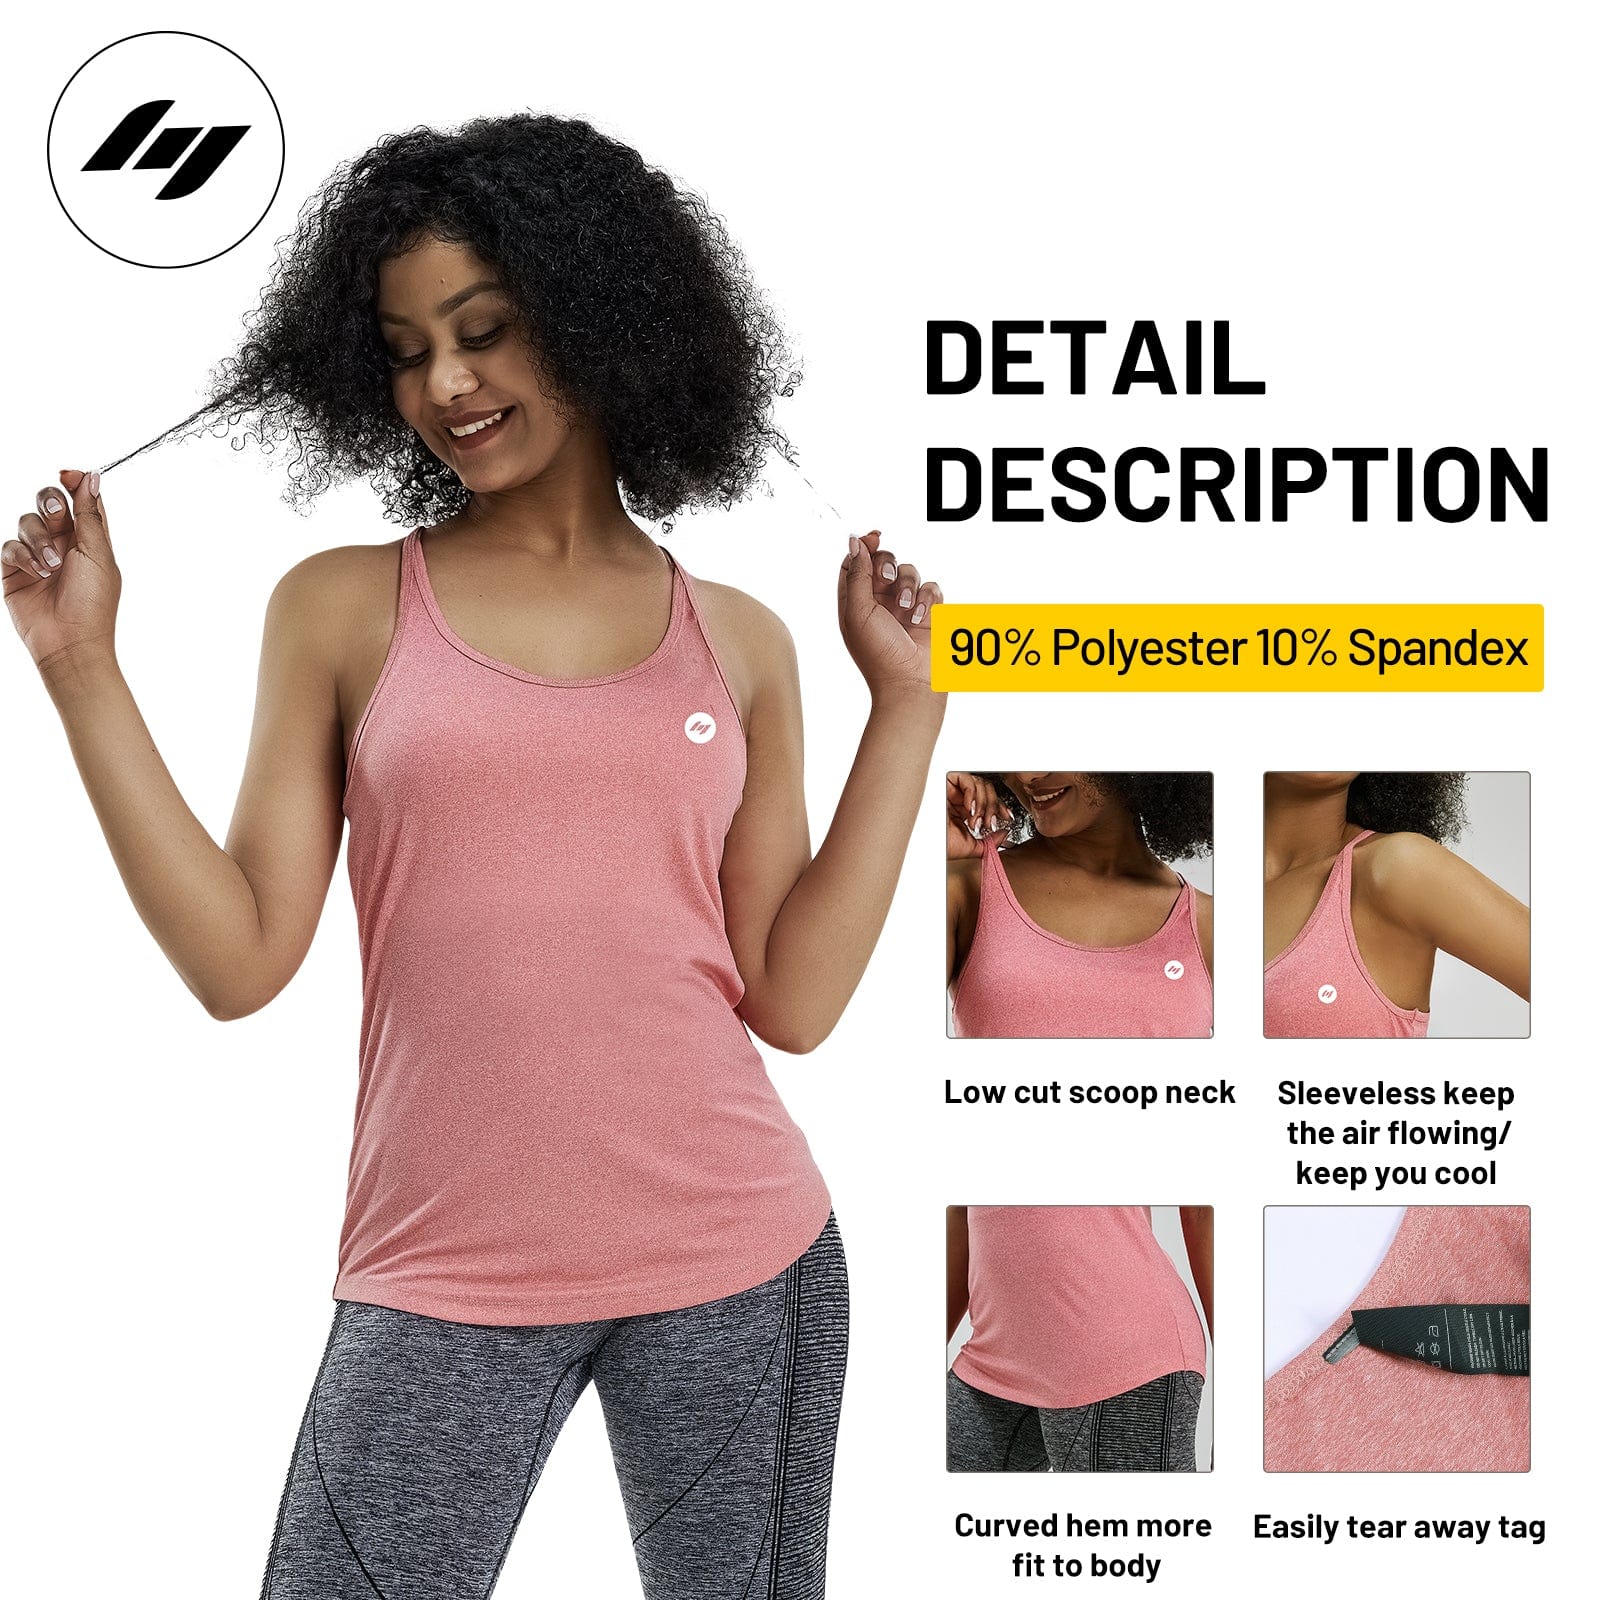 Women's Workout Tank Tops Dry Fit Athletic Sleeveless Shirts Women's Tank Top Mier Sports